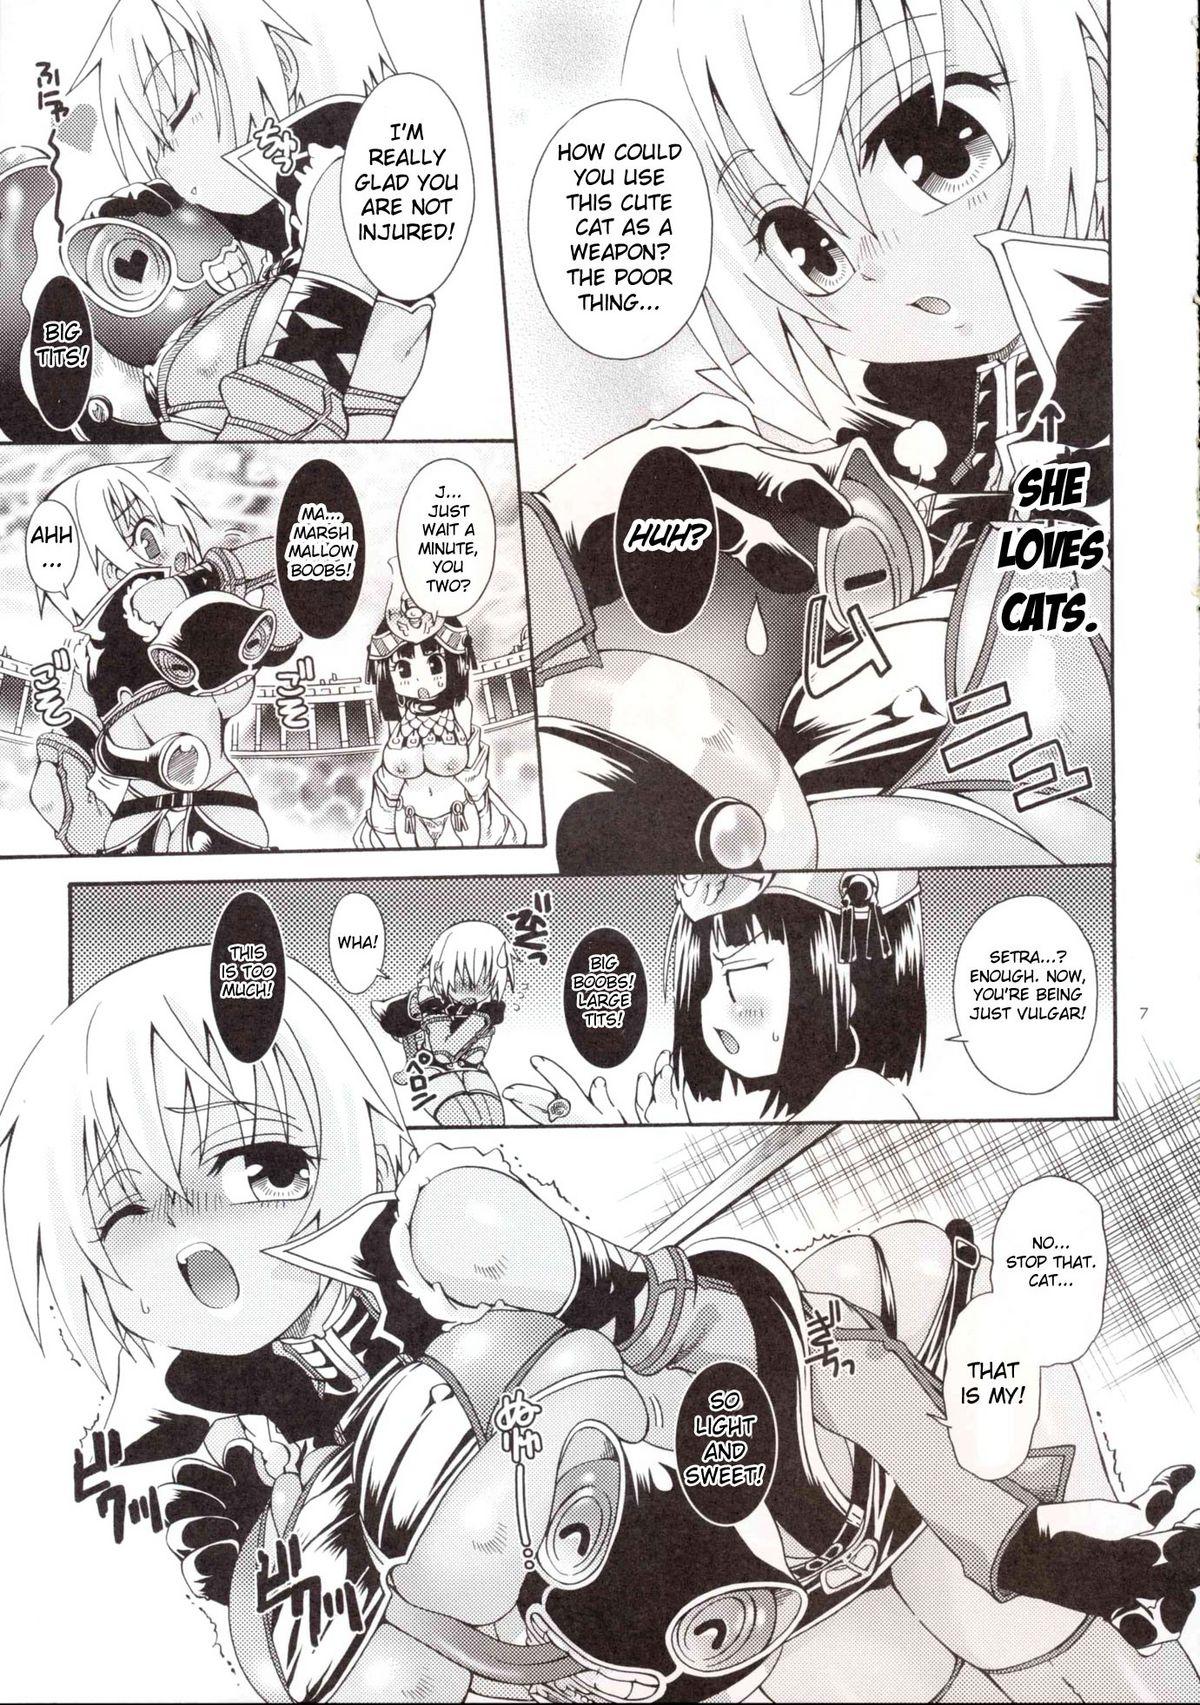 Parody Cat Fight Over Drive - Queens blade Chichona - Page 6